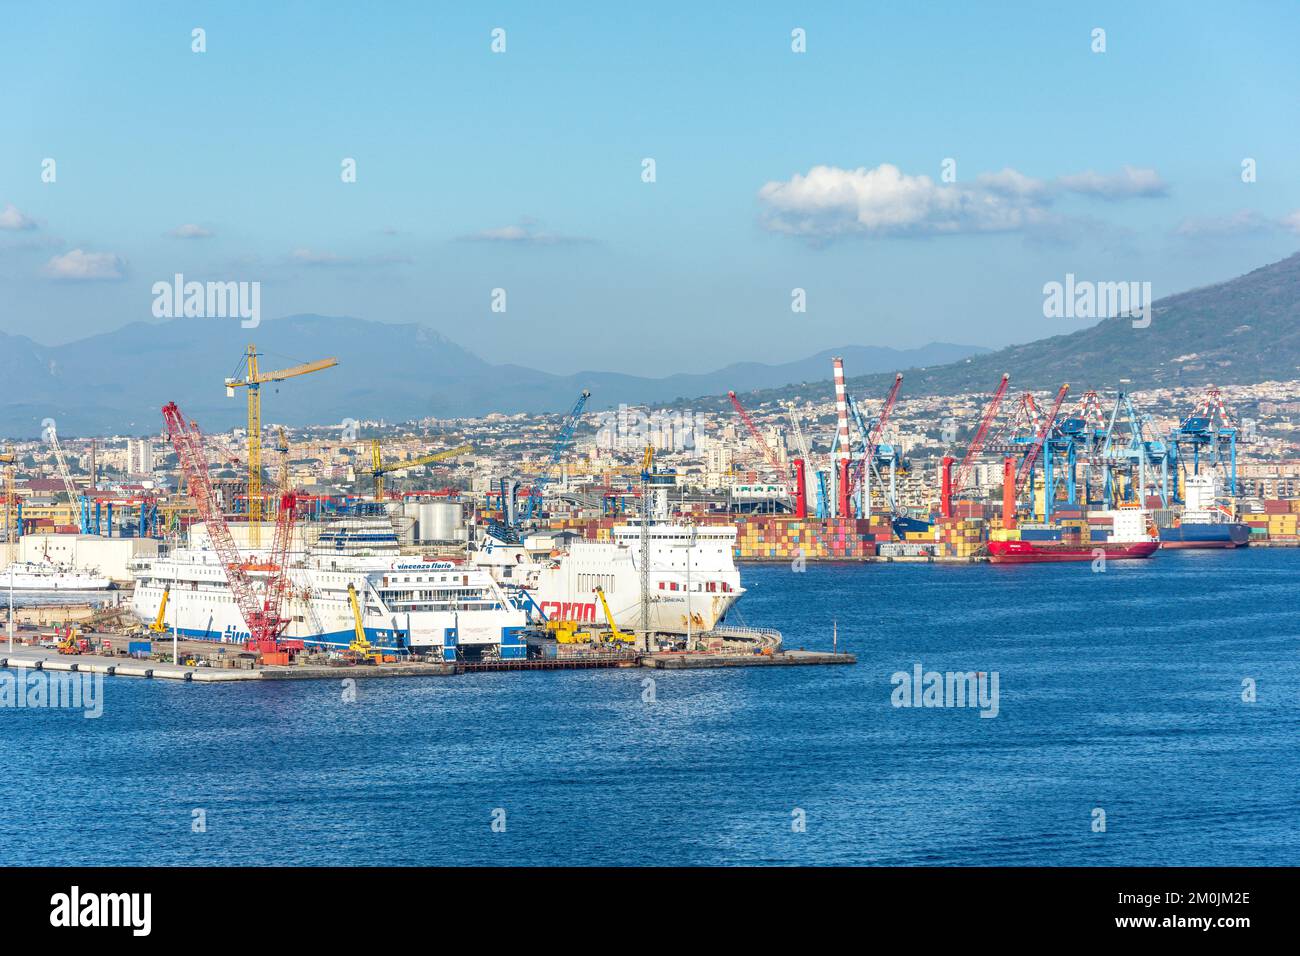 Container terminal and ships in Port of Naples, City of Naples (Napoli), Campania Region, Italy Stock Photo